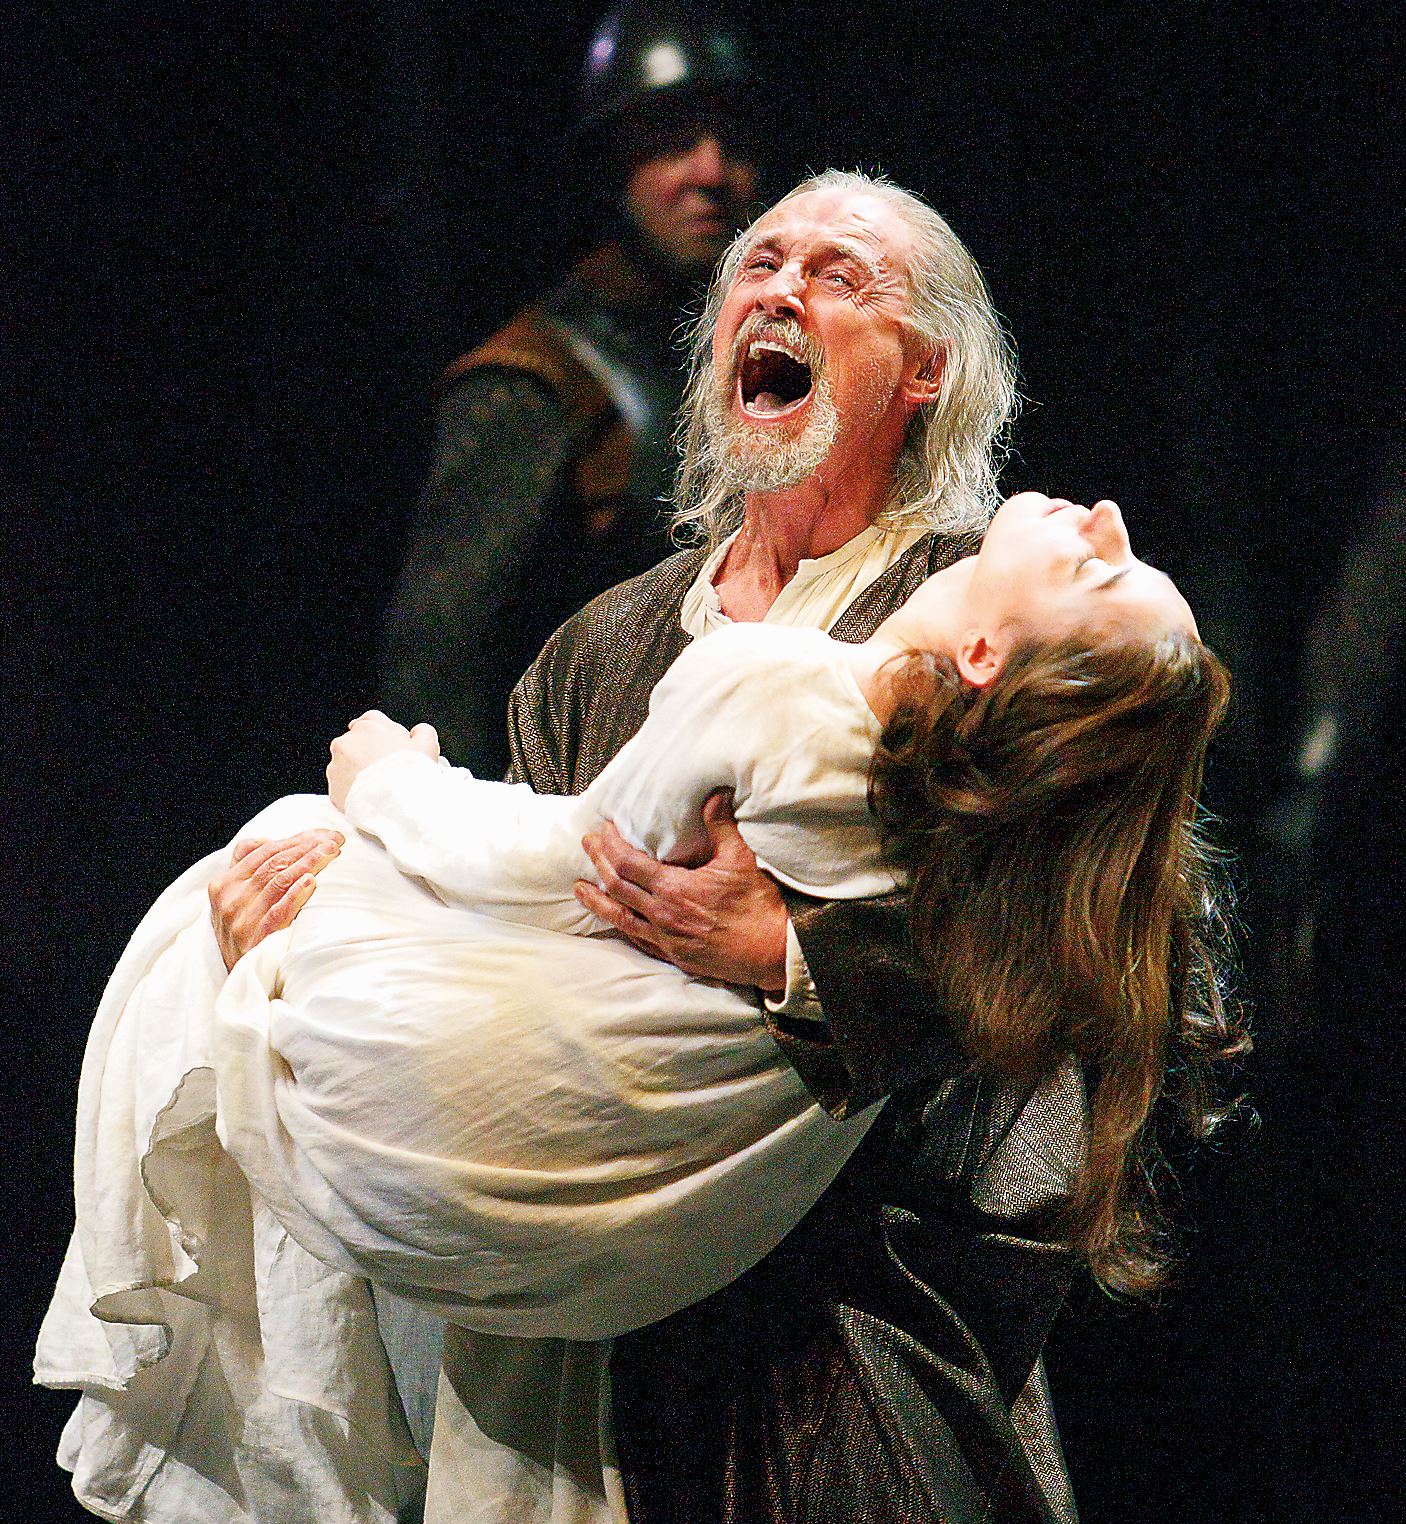 Shakespeares portrayal of lear and his daughters in the play king lear